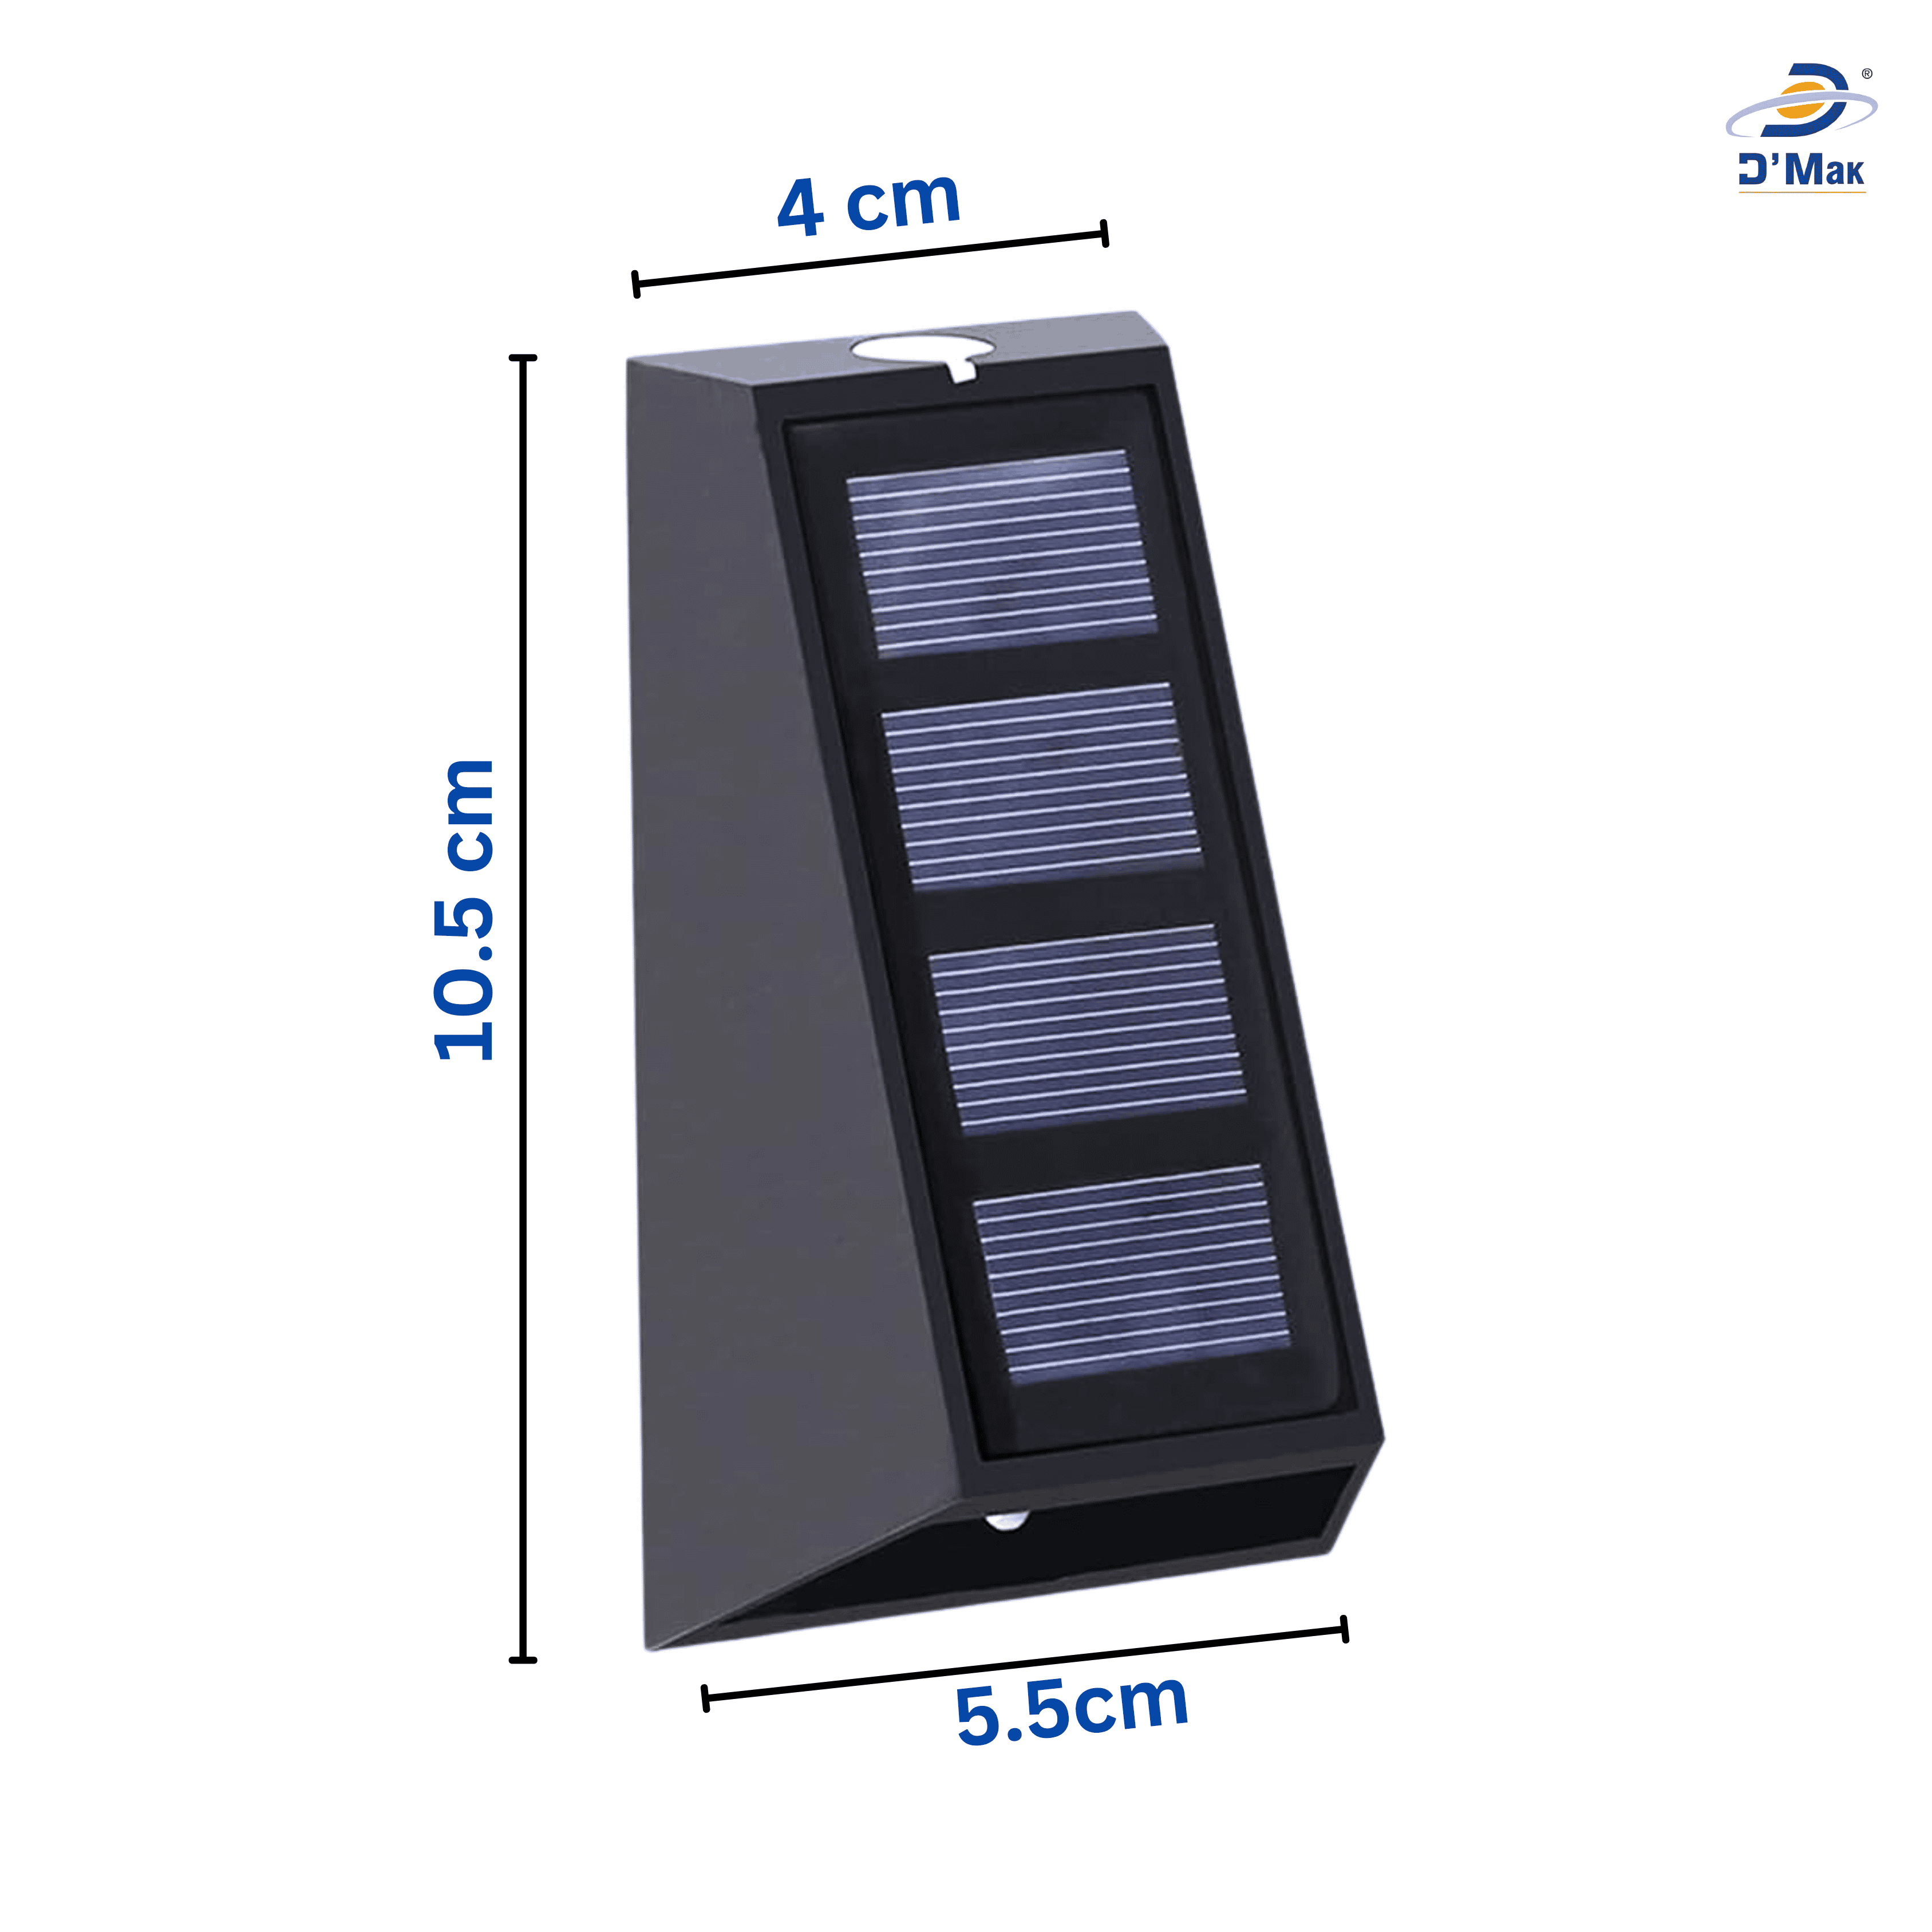 DMak Solar Fence Lights Waterproof Automatic Decorative Outdoor Solar Wall Lights for Deck, Patio, Stairs, Yard, Path and Driveway.(Automatic Color Changing)